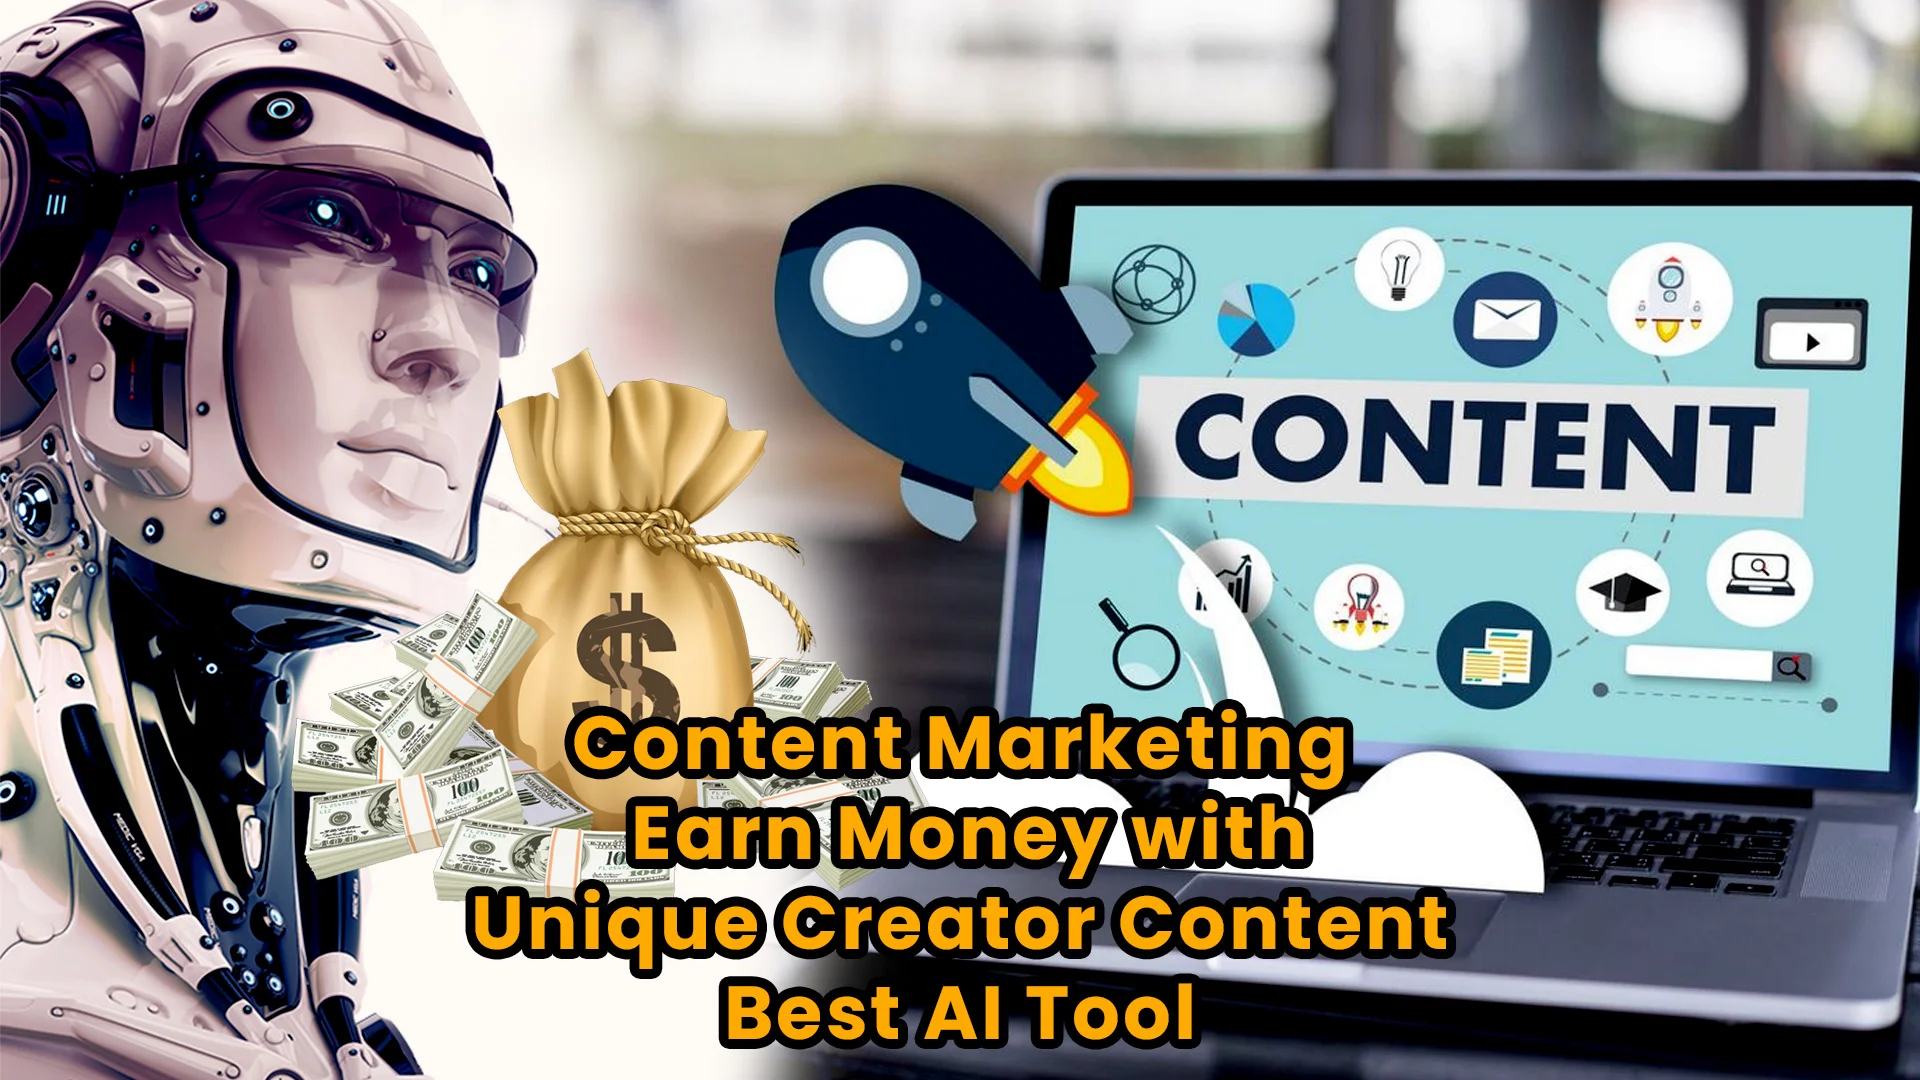 Content marketing AI Tools, Boost Your Income with Intelligent Automation